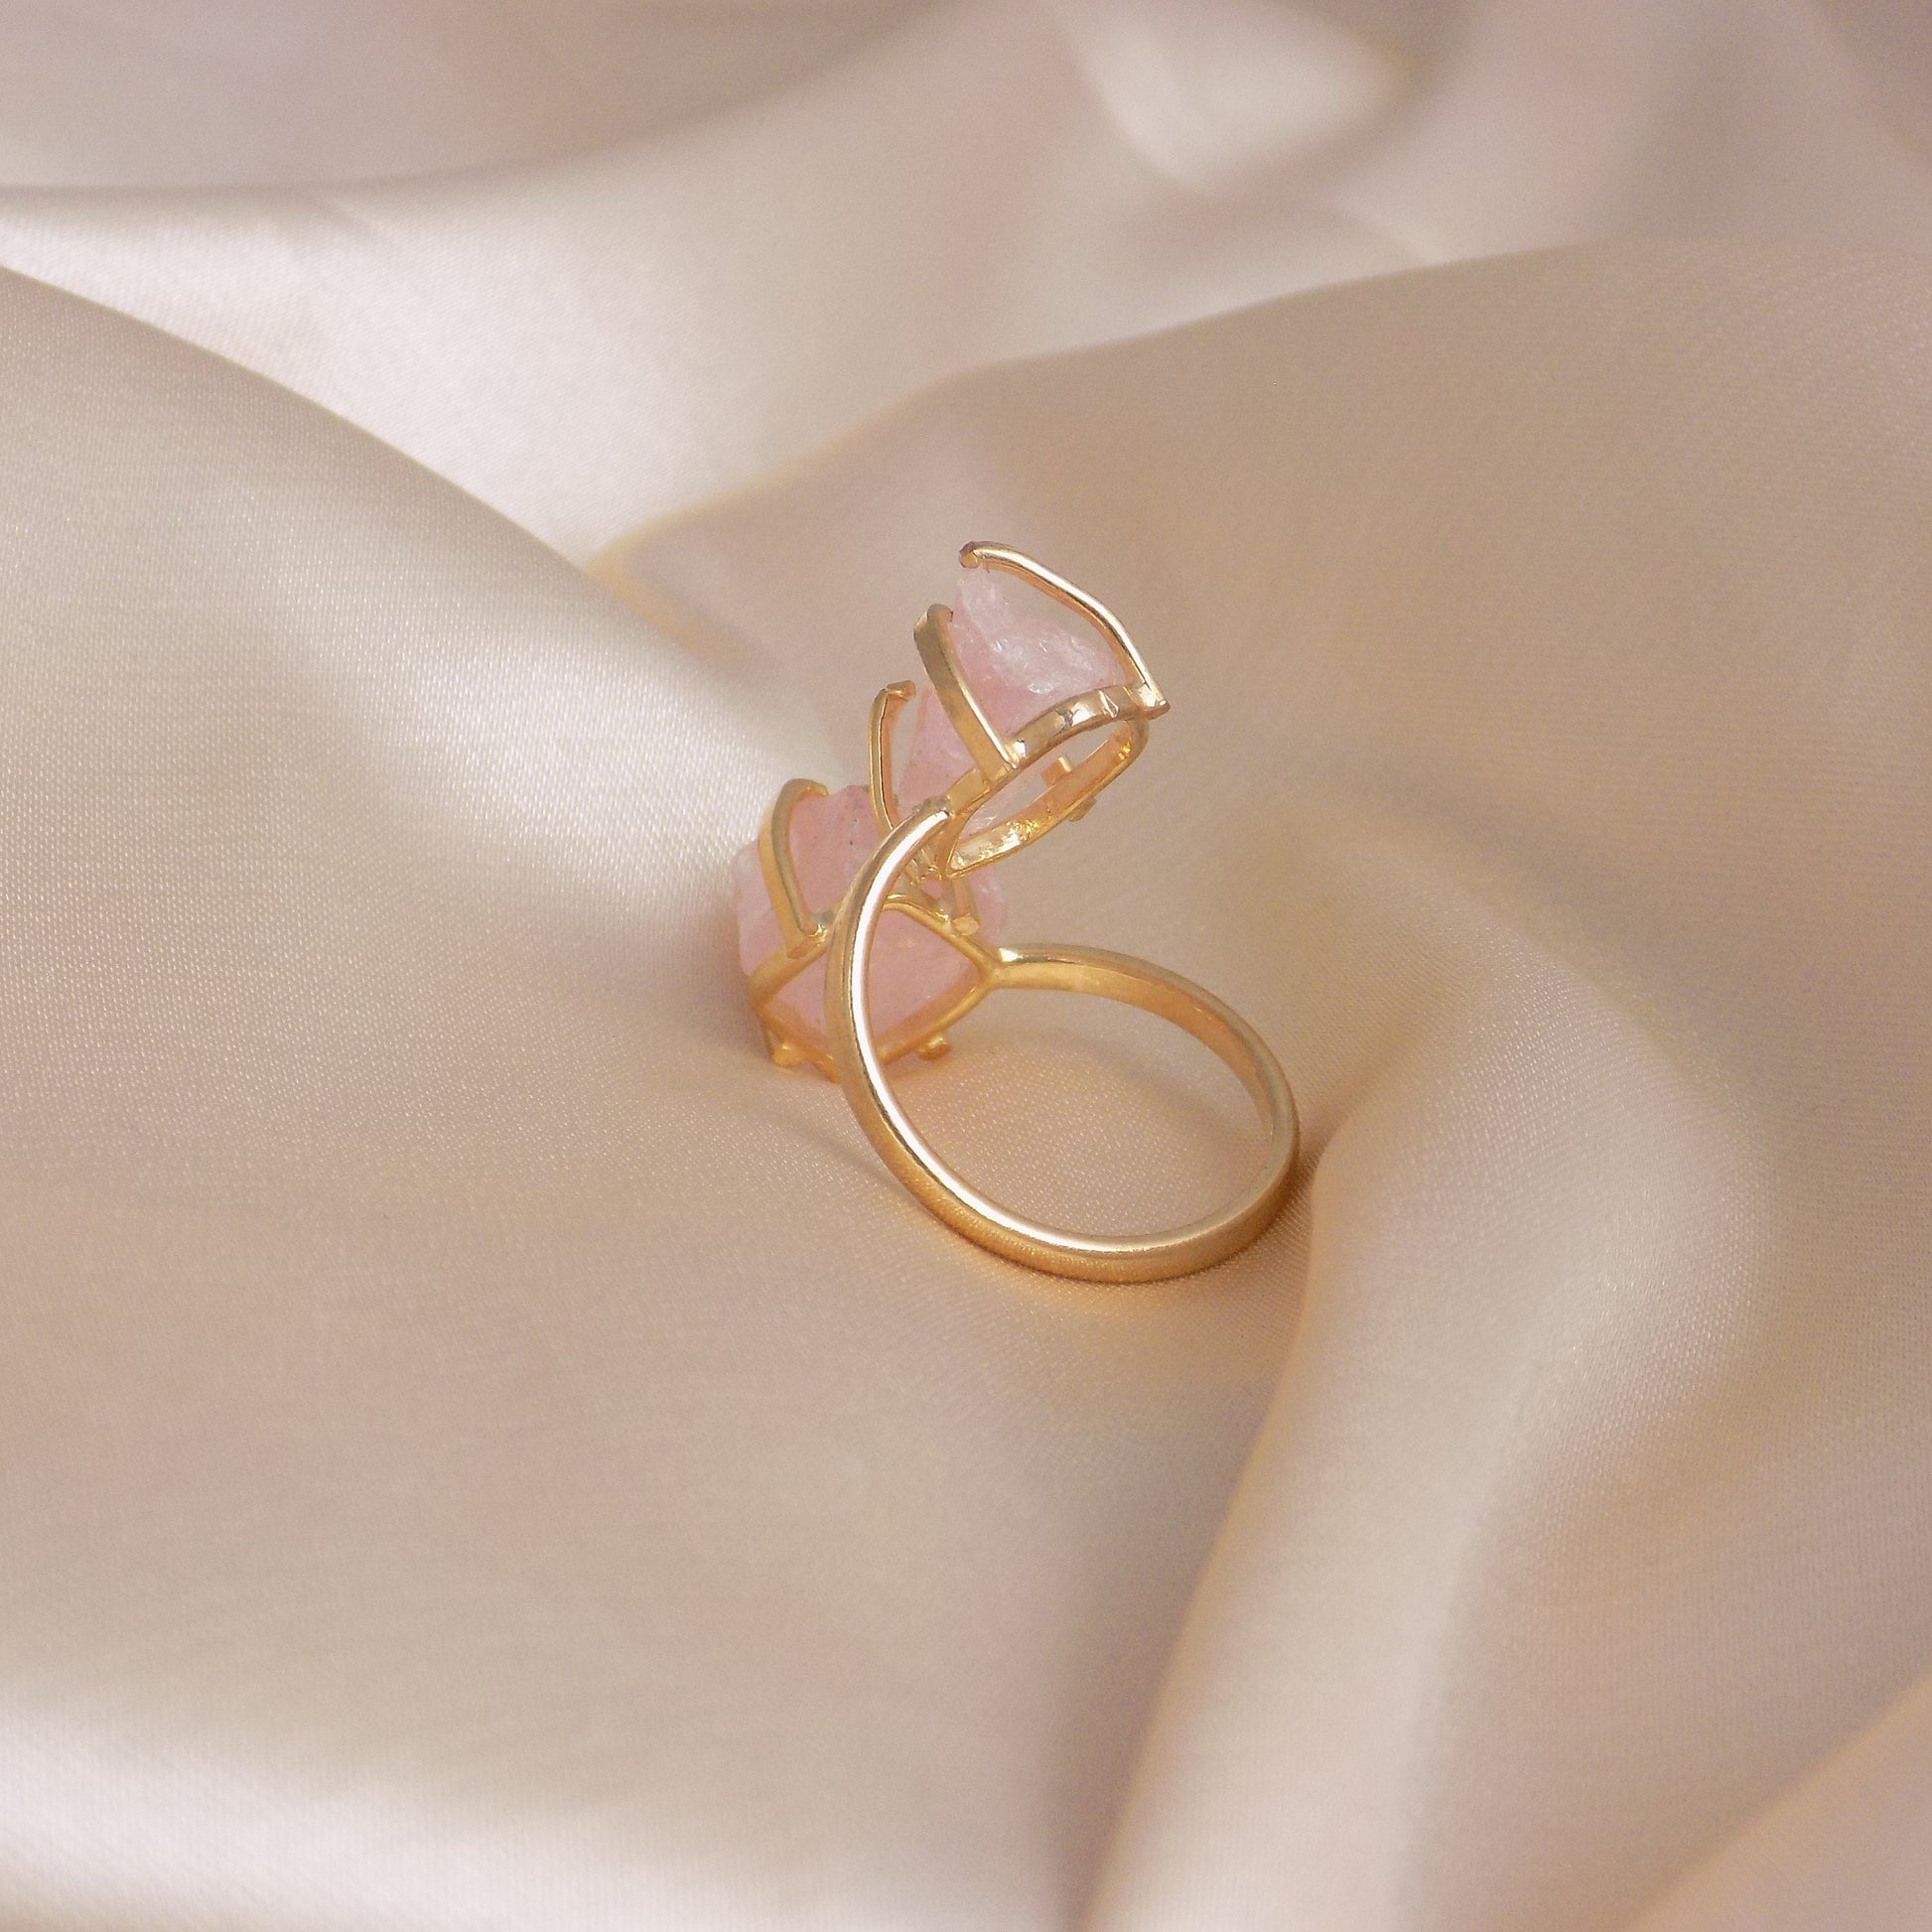 Adjustable Gold Ring with Raw Natural Rose Quartz - Elegant Dual Stone Statement Ring in Light Pink, G15